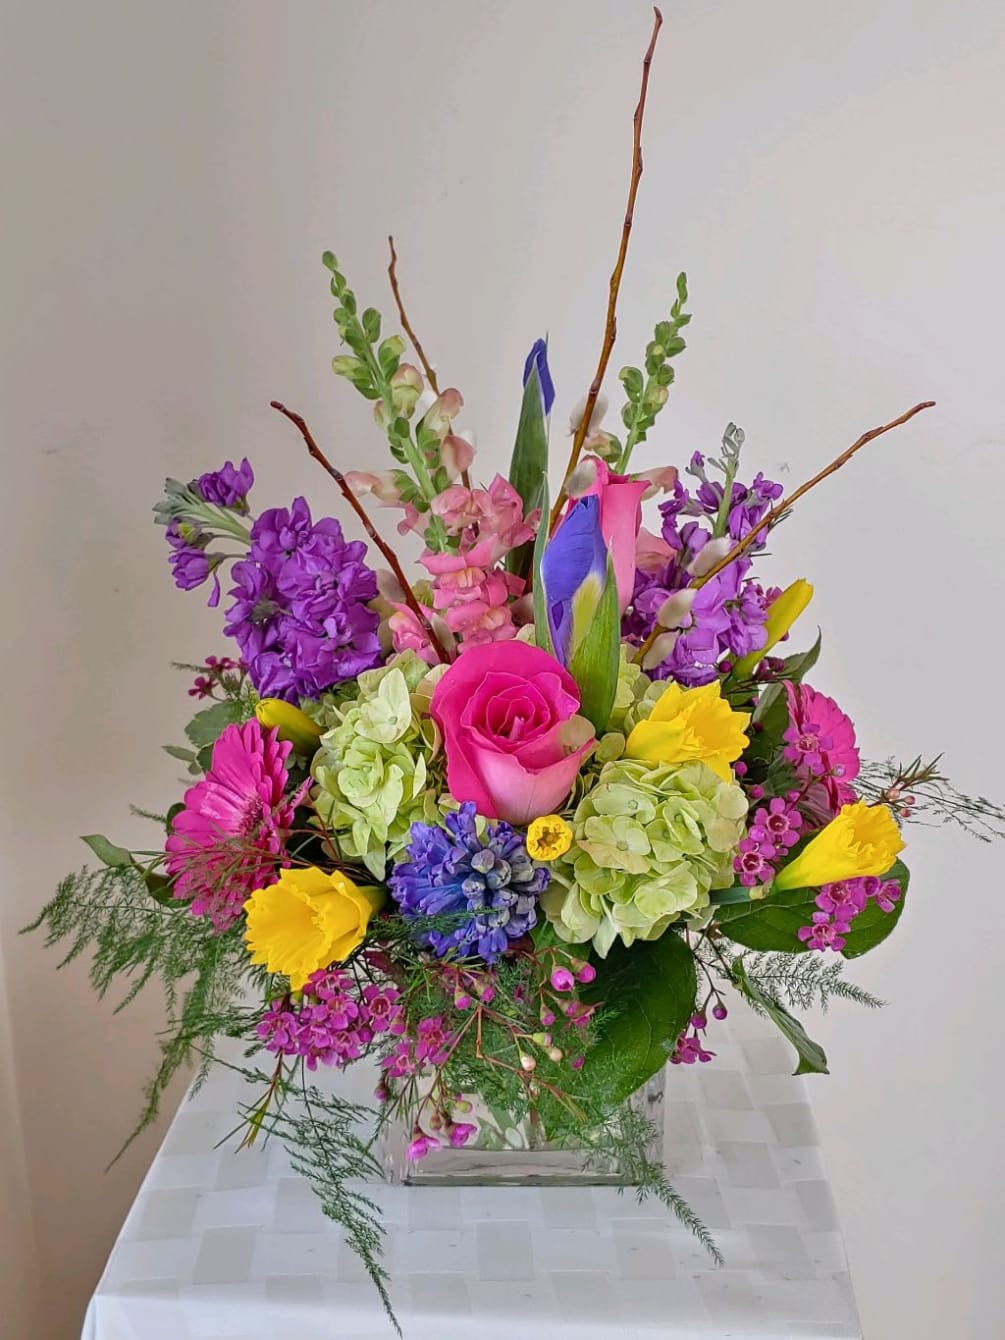 A clear cube arrangement with an assortement of spring flowers.